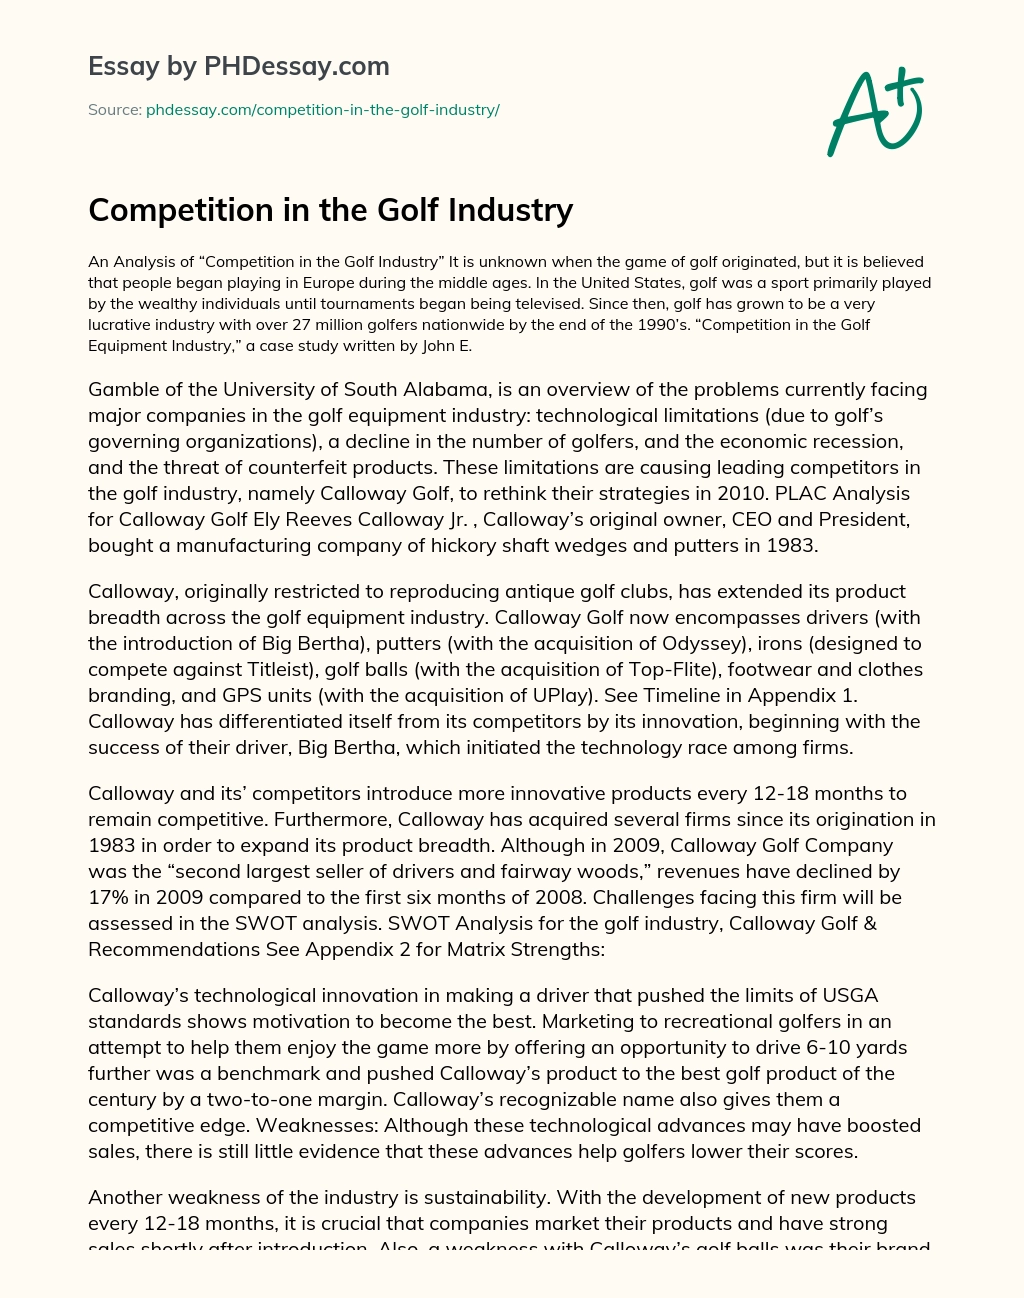 Competition in the Golf Industry essay